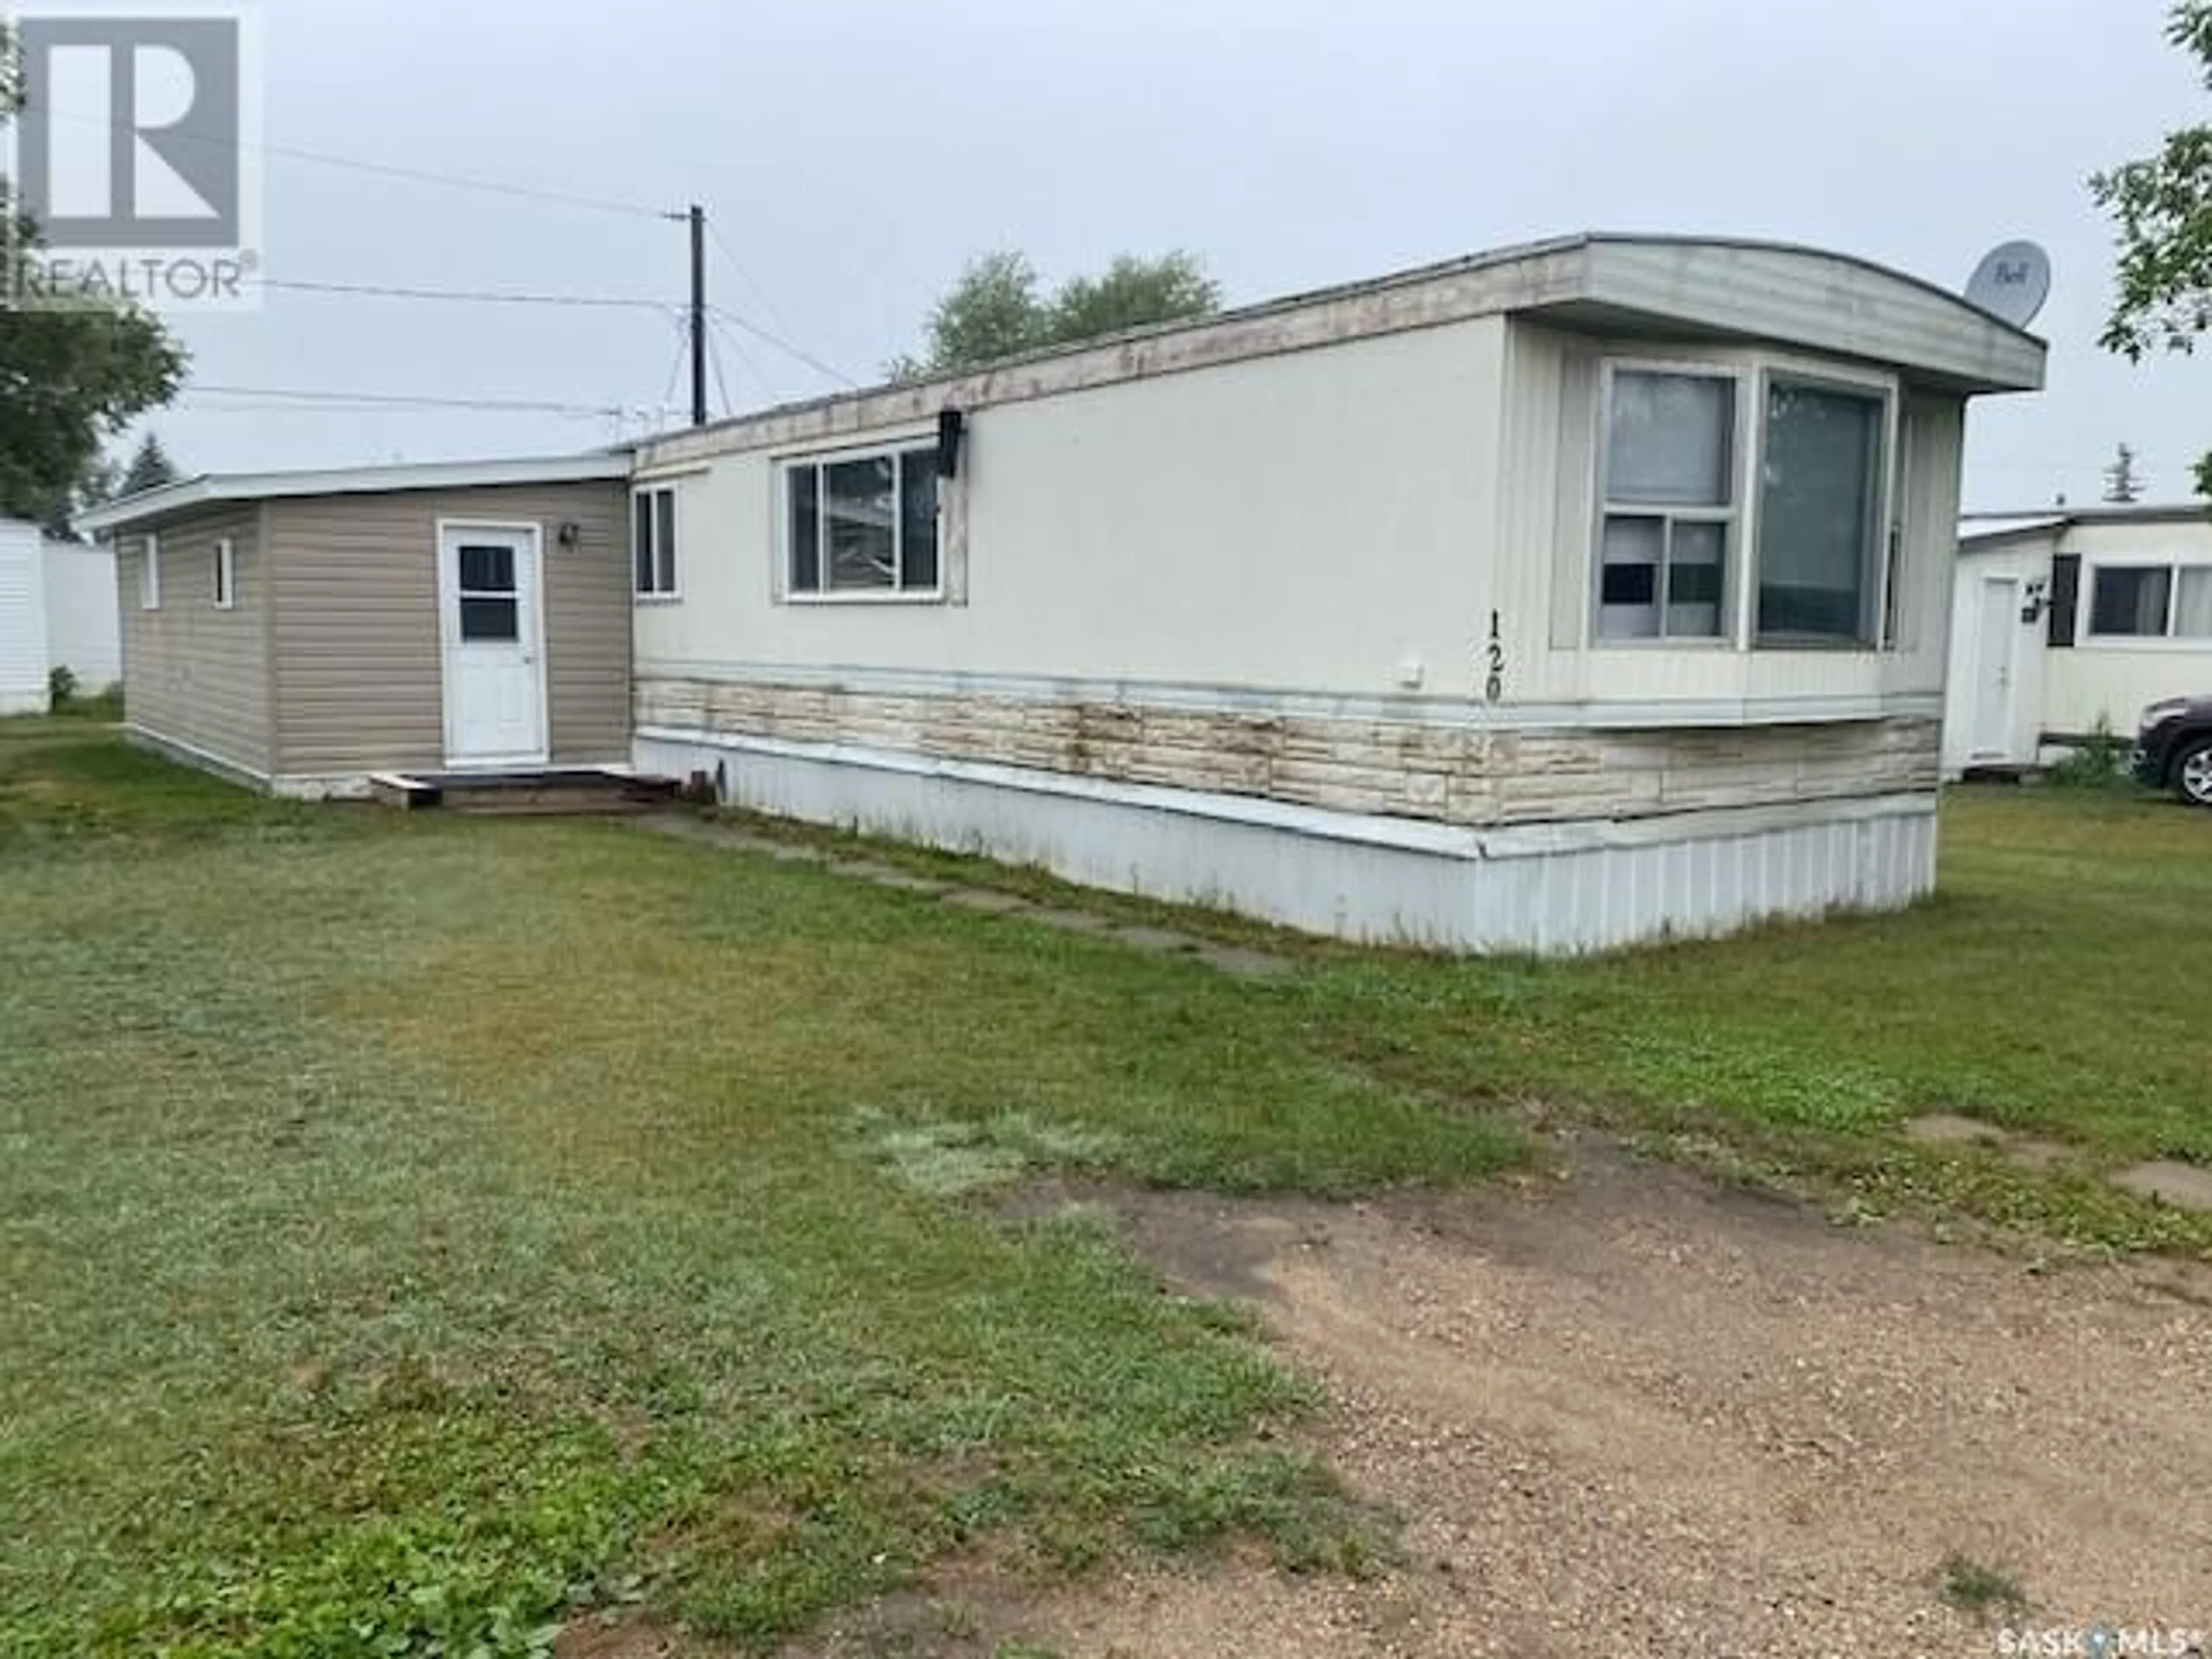 Home with unknown exterior material for 120 Larch STREET, Caronport Saskatchewan S0H0S0